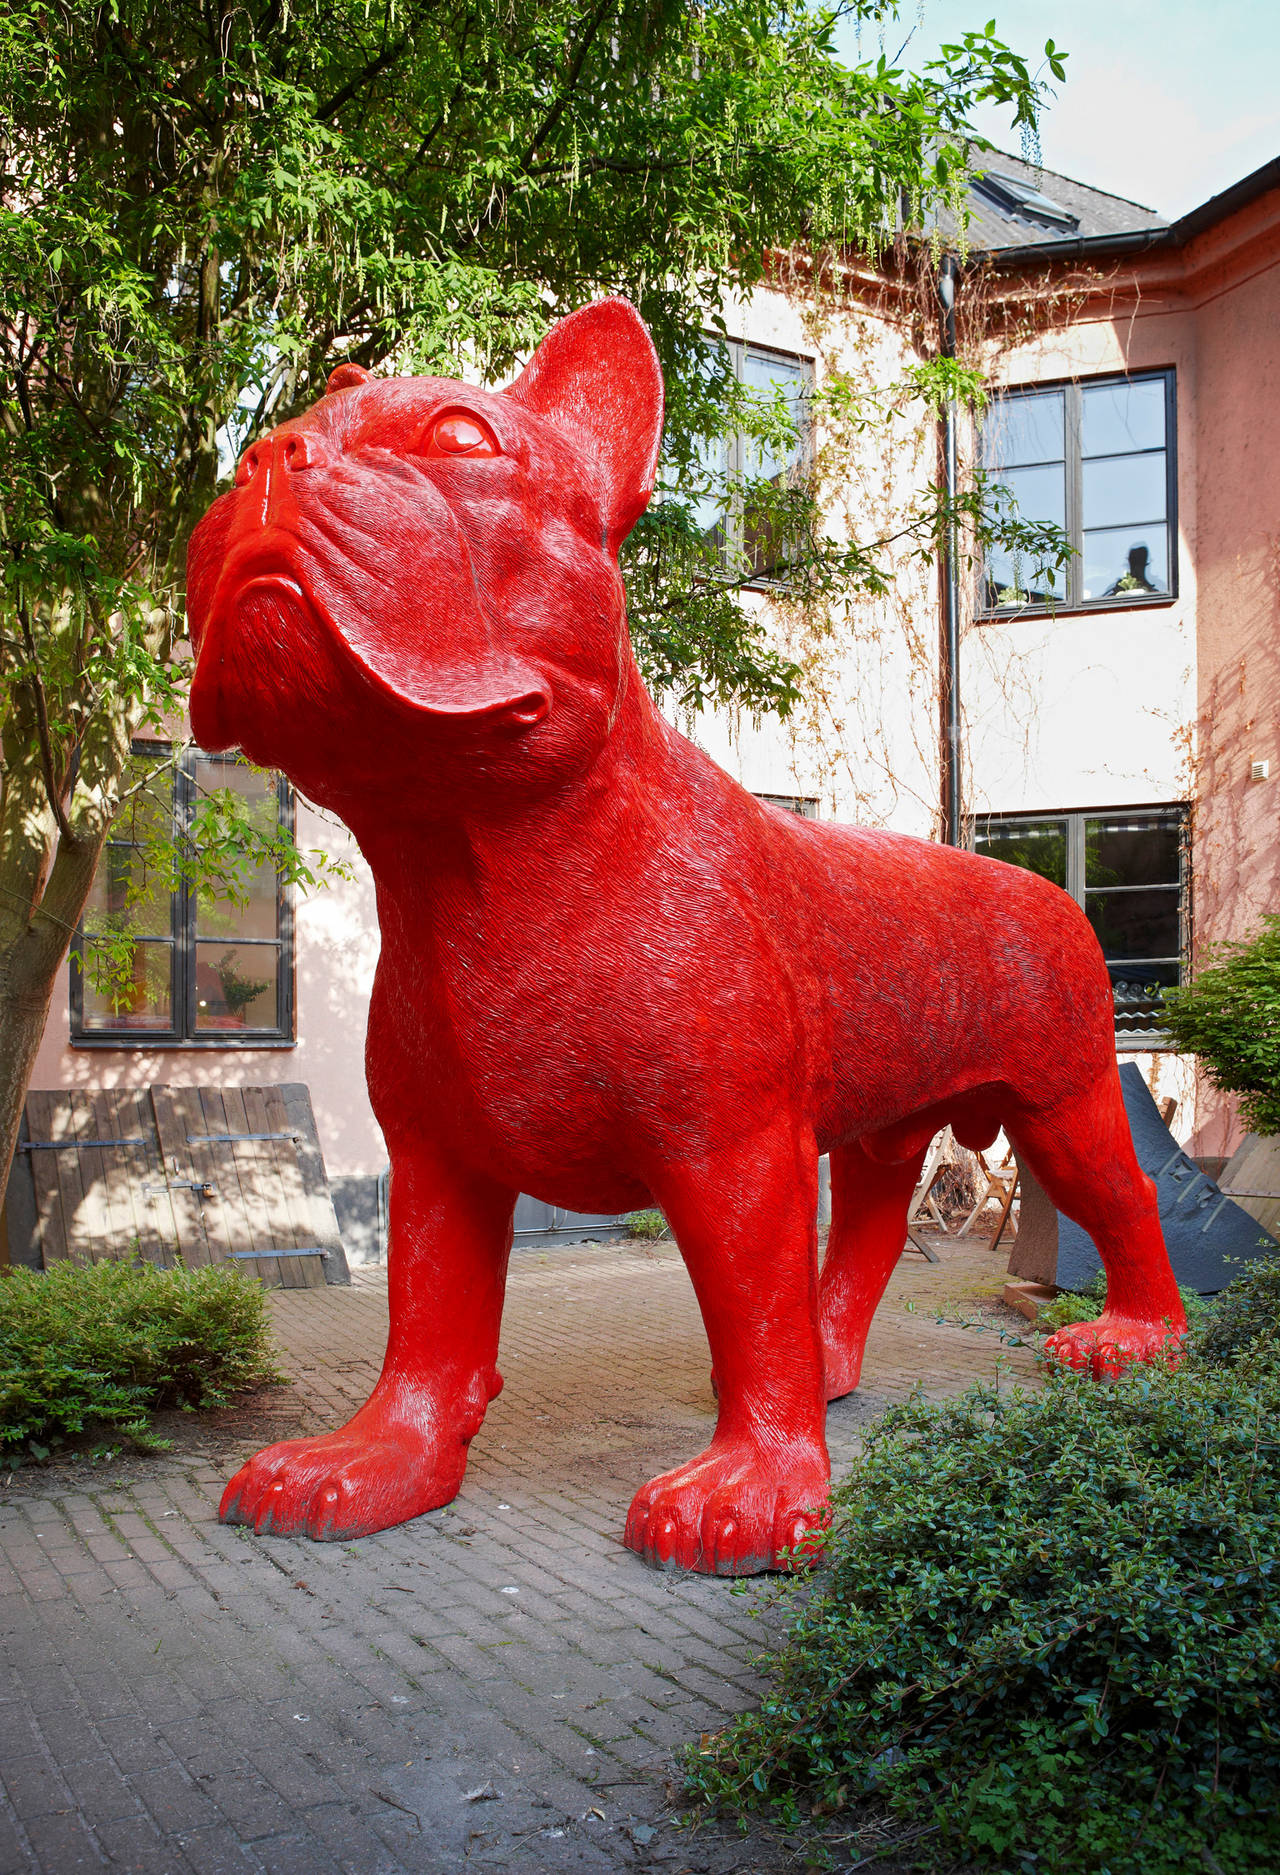 Big red cloned French Bulldog - Sculpture by William Sweetlove